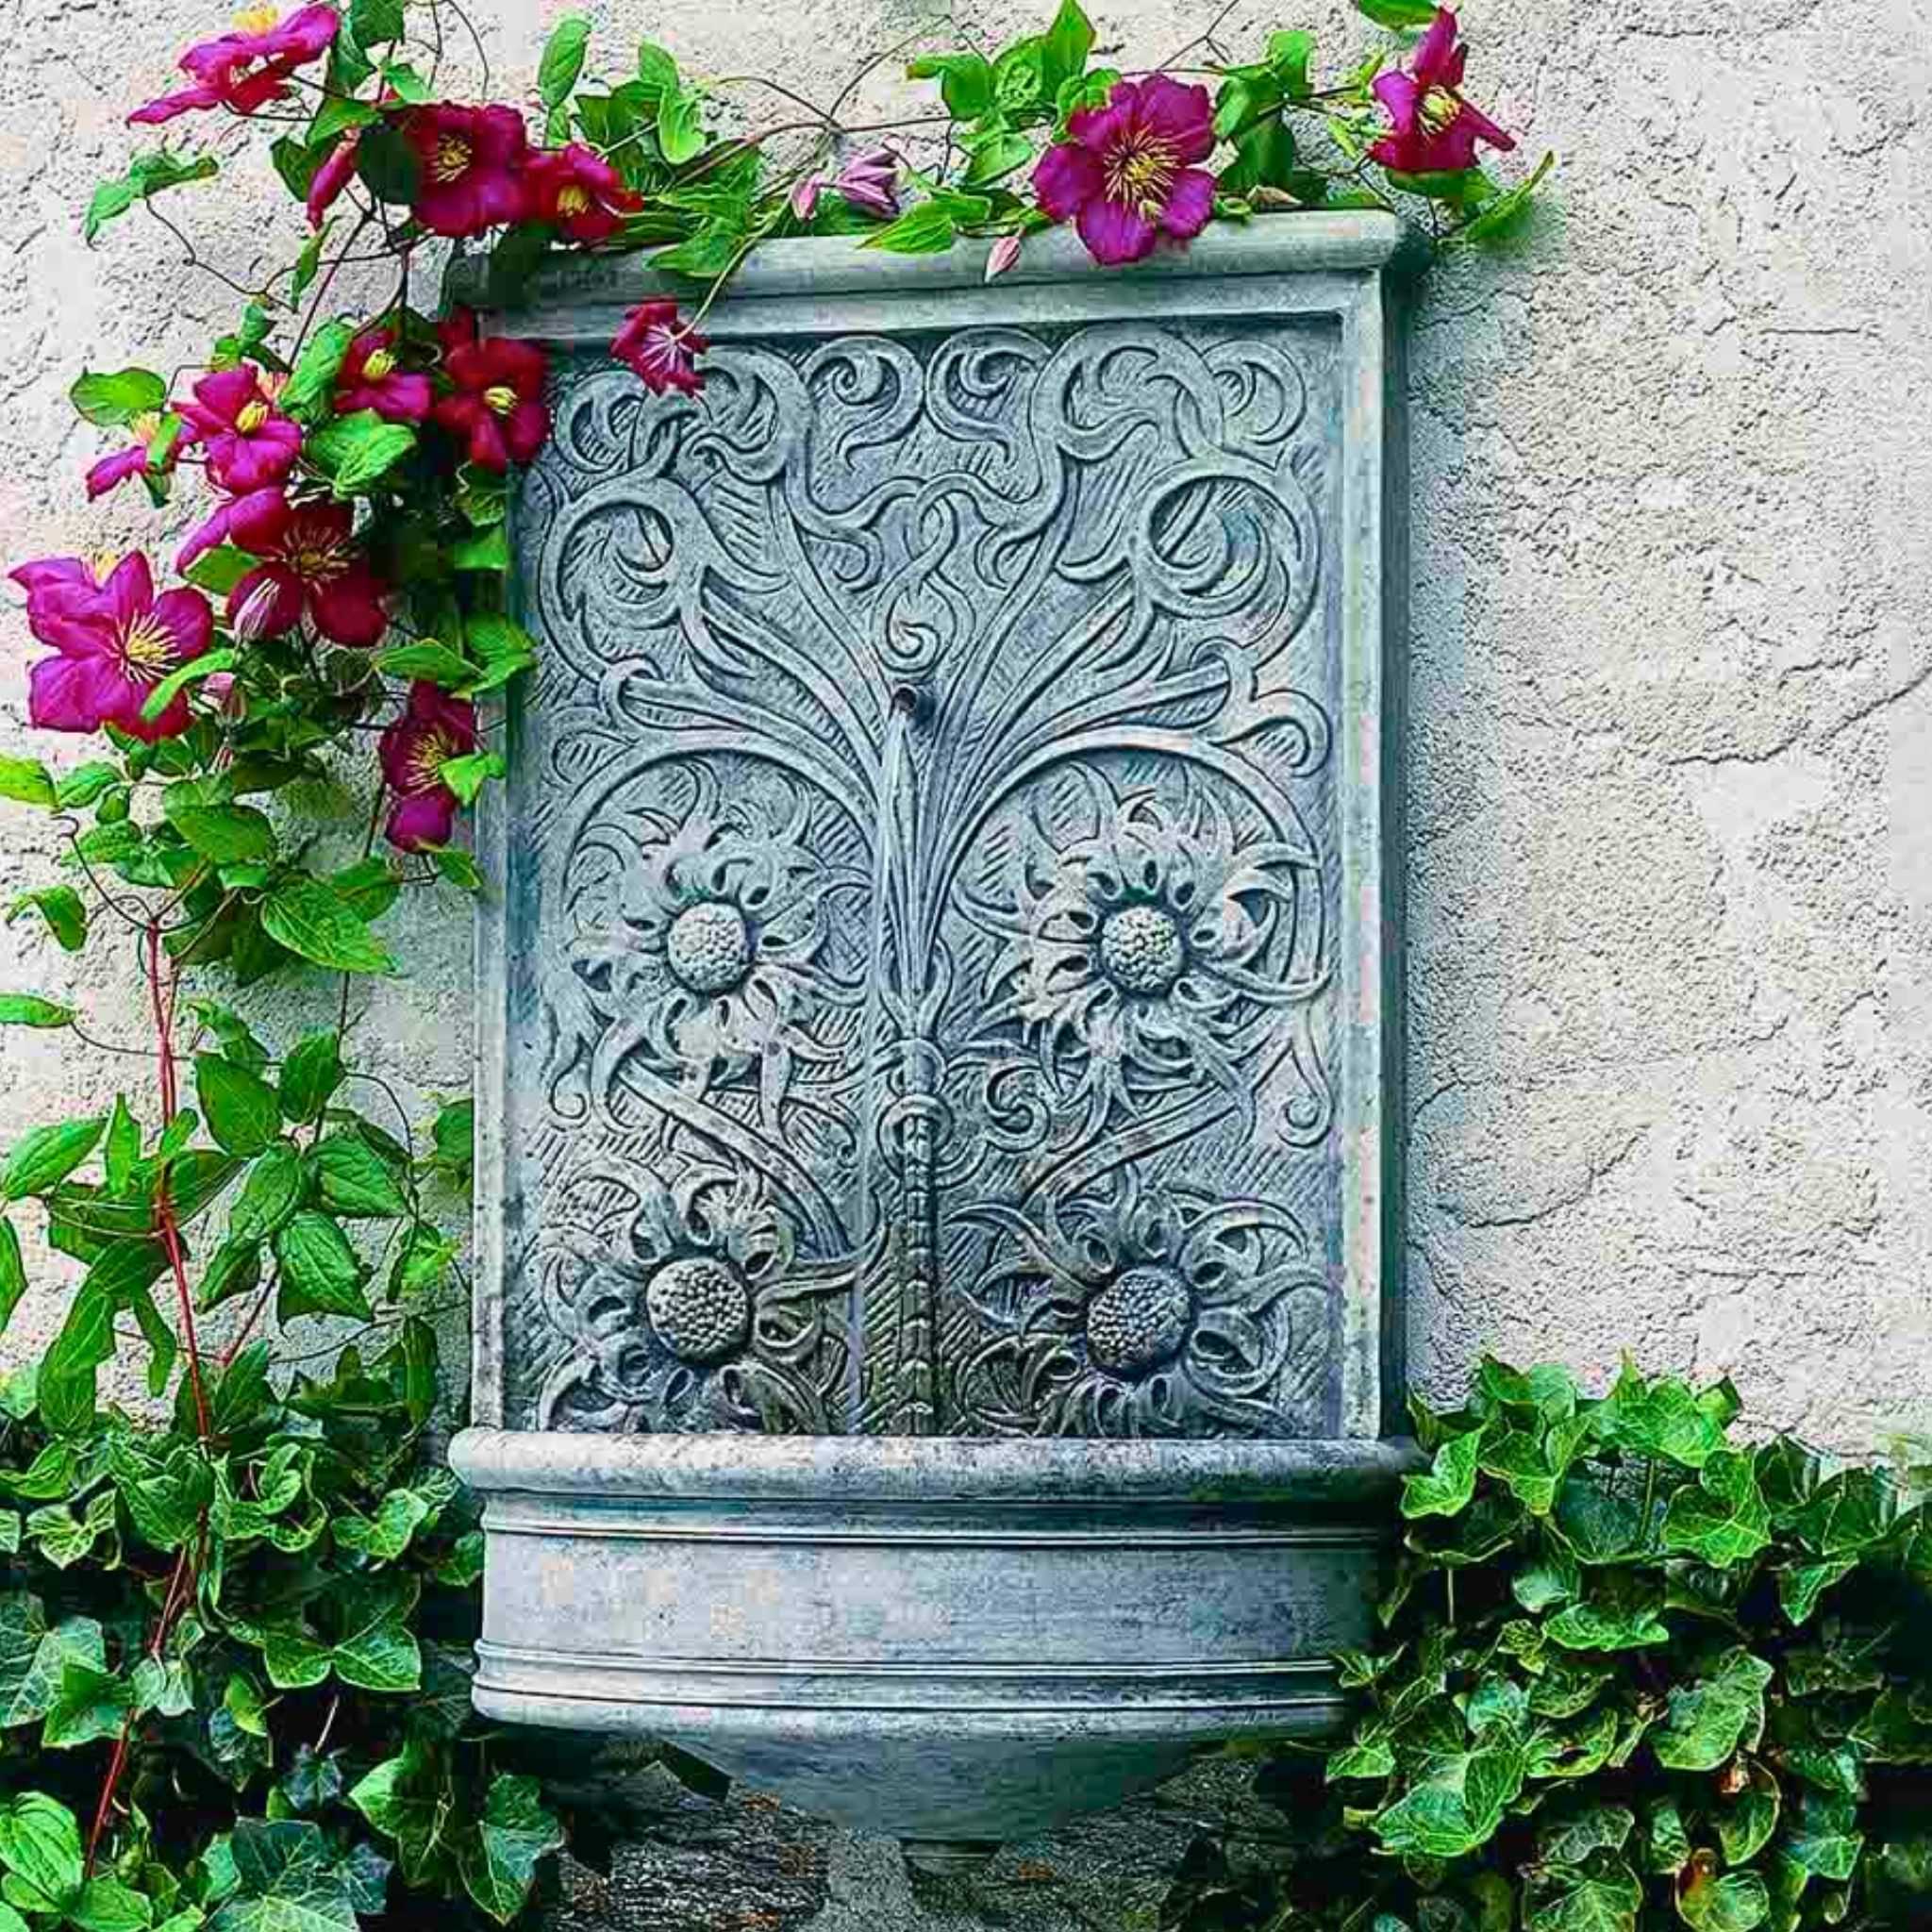 Sussex Hanging Wall Fountain - Campania #FT39